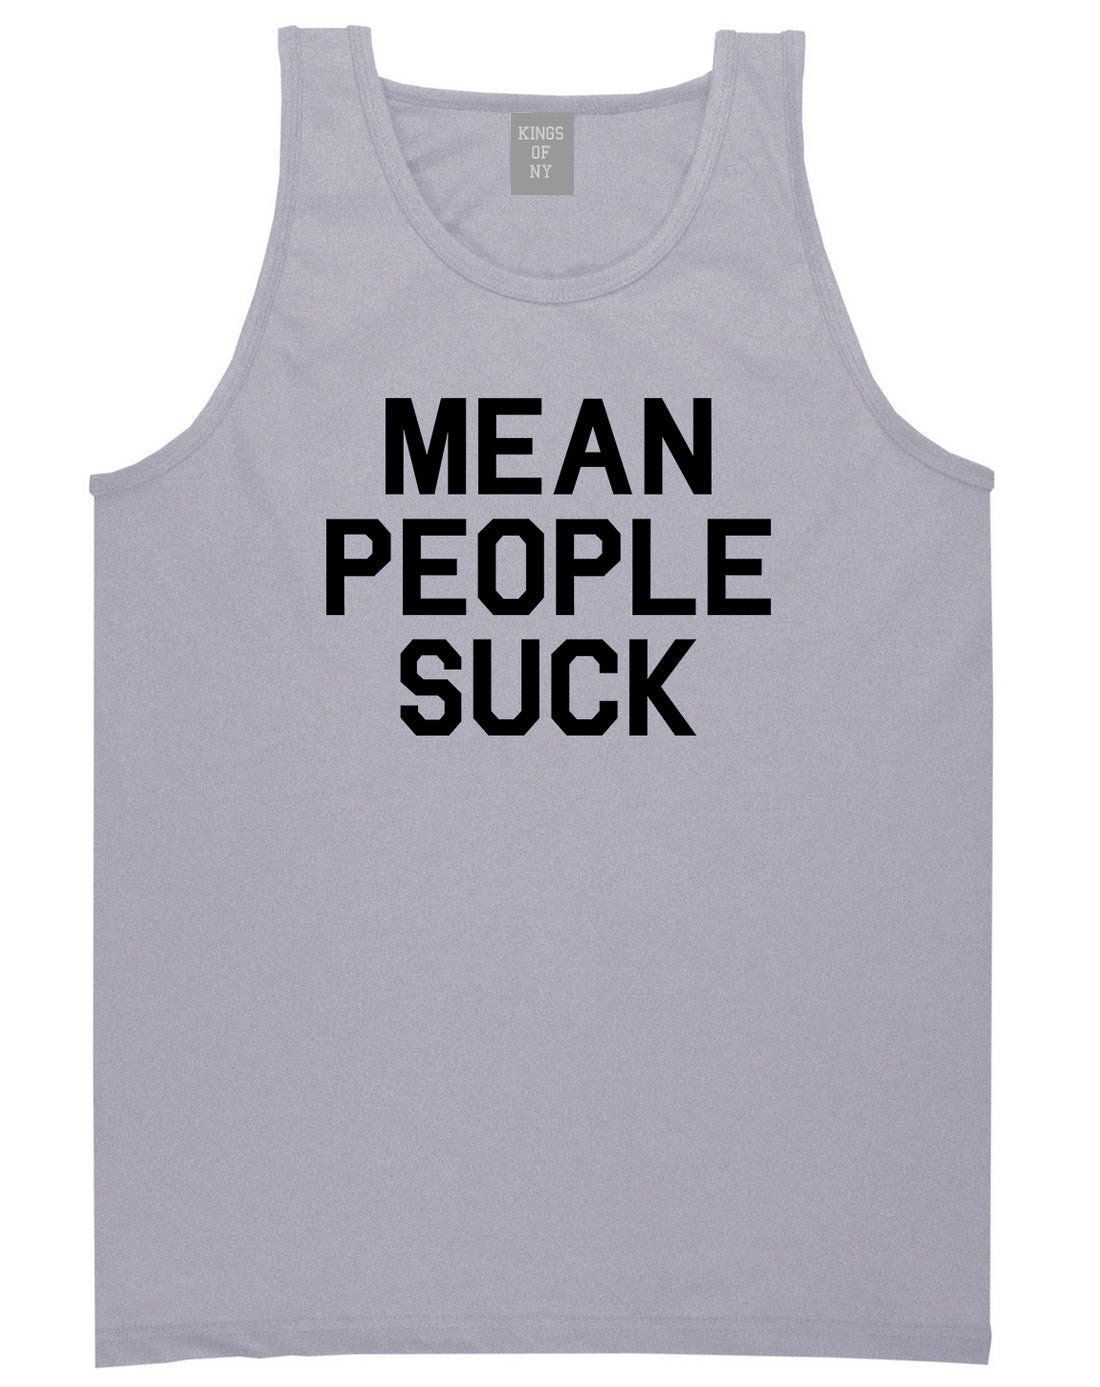 Mean People Suck Mens Tank Top Shirt Grey by Kings Of NY